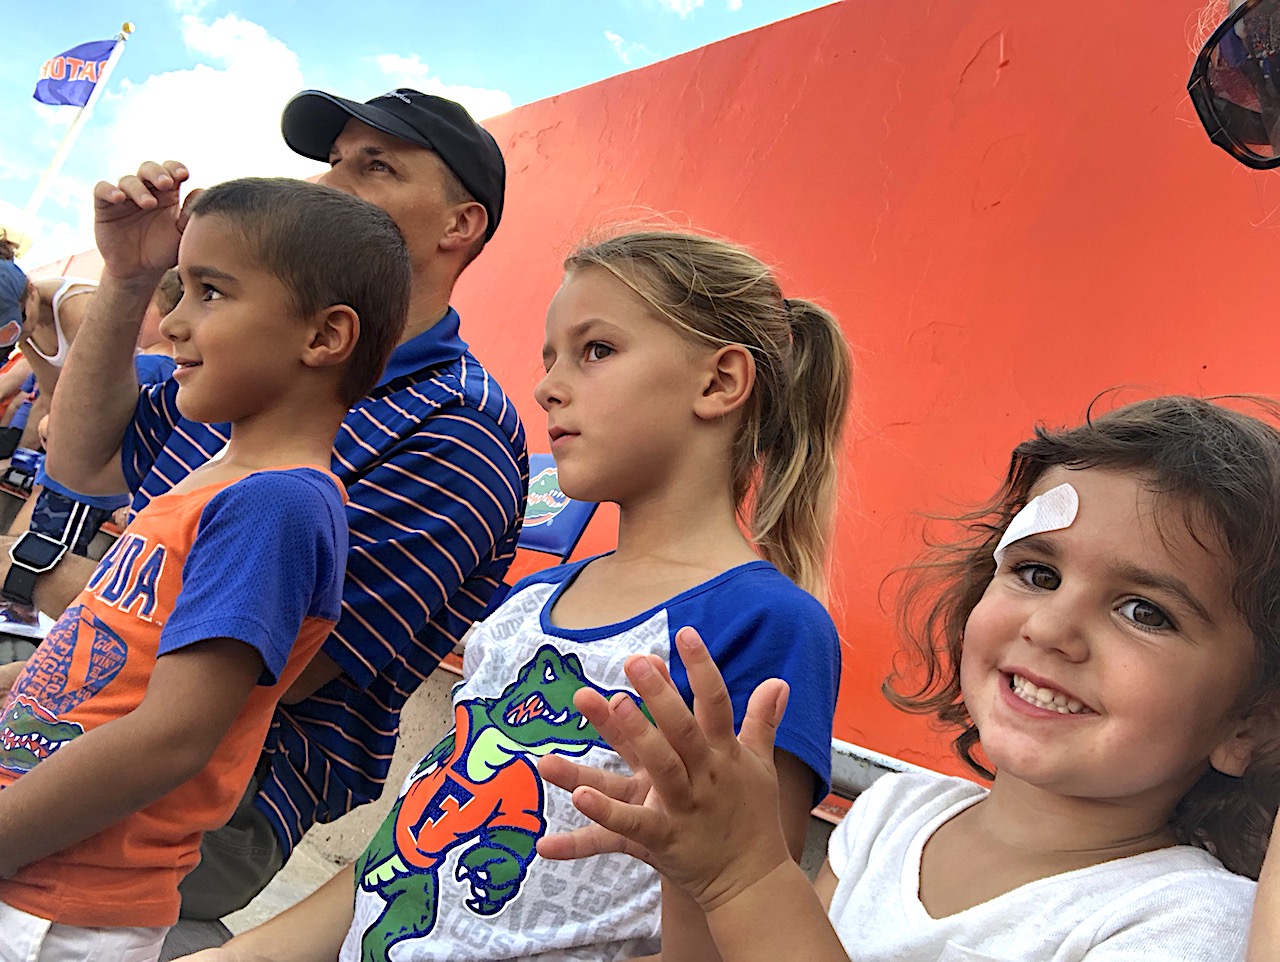 Family at UF Sports Event - 2-day itinerary for families in Gainesville, FL #gainesville #florida #tourofflorida #alachuacounty #gainesvilleFL #universityofflorida #UF #gogators #Gainesvillewithkids #gainesvilleitinerary